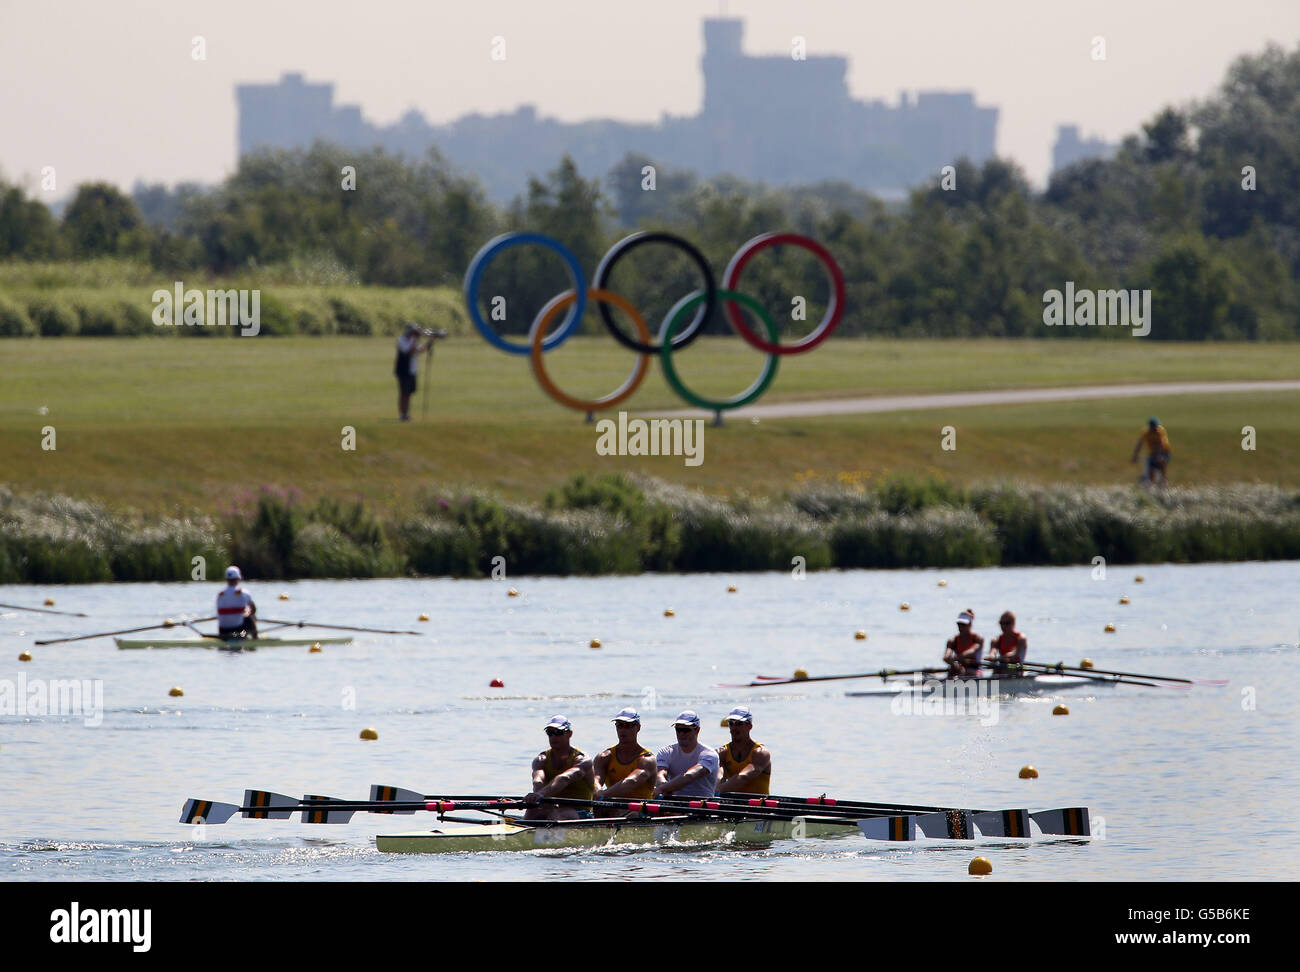 Crews make their way down the course past the Olympic rings and Windsor Castle during the training session at Eton Dorney Rowing Lake, Buckinghamshire. Stock Photo